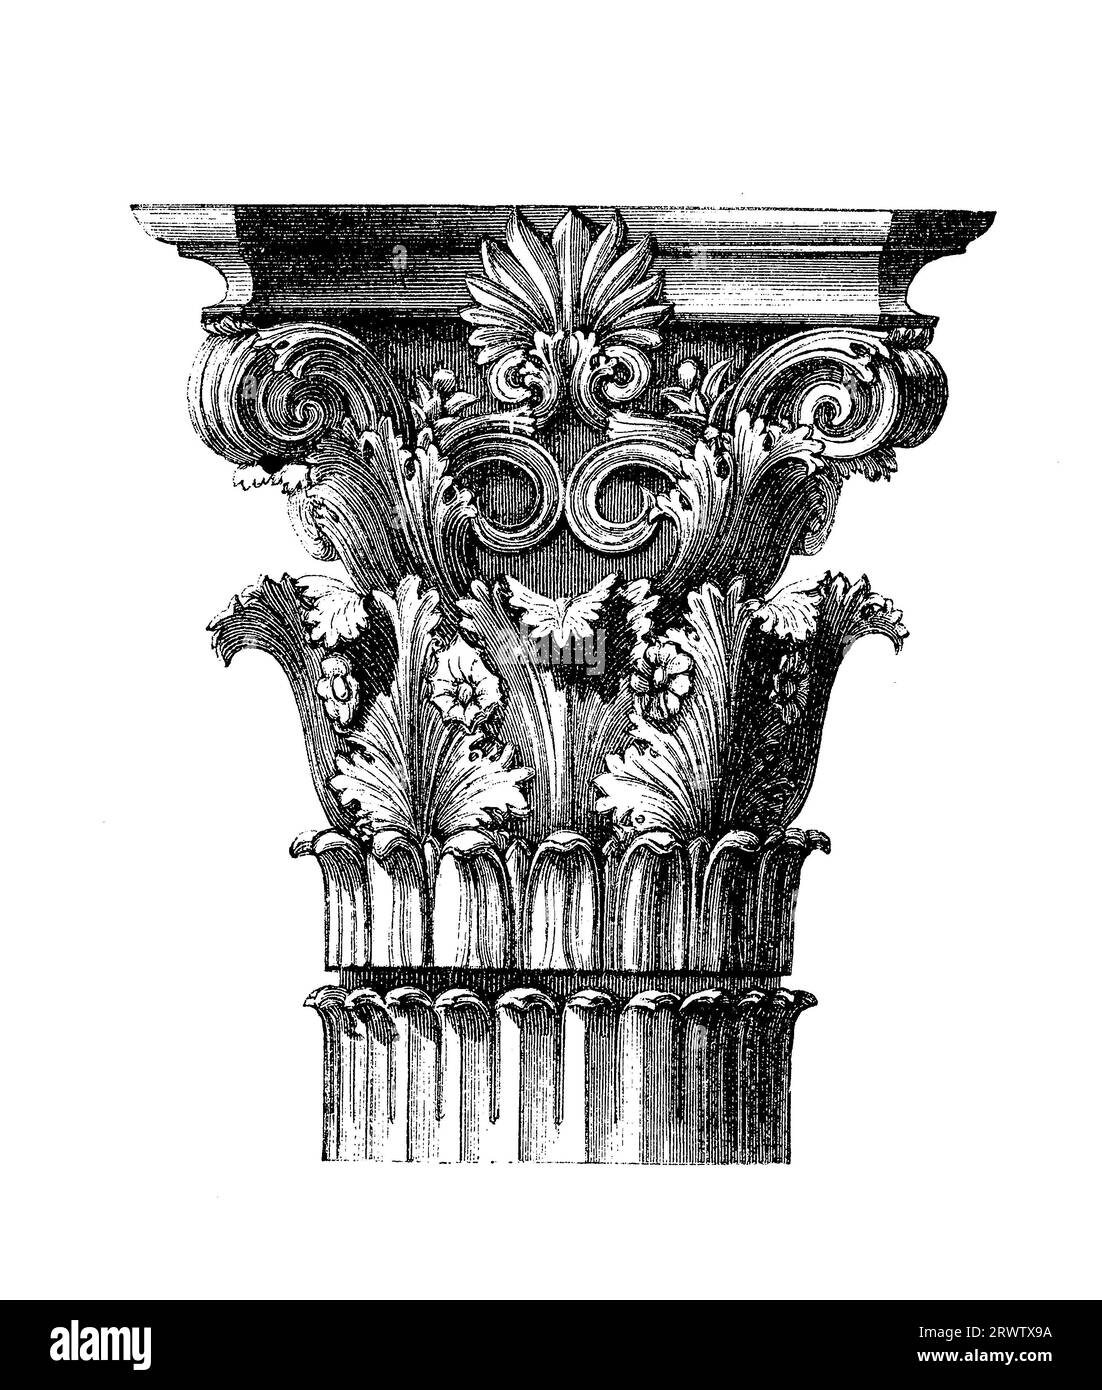 Corinthian order capital with acanthus leaves and scrolls, was the most ornate order of Greek and Roman architecture, vintage engraving Stock Photo